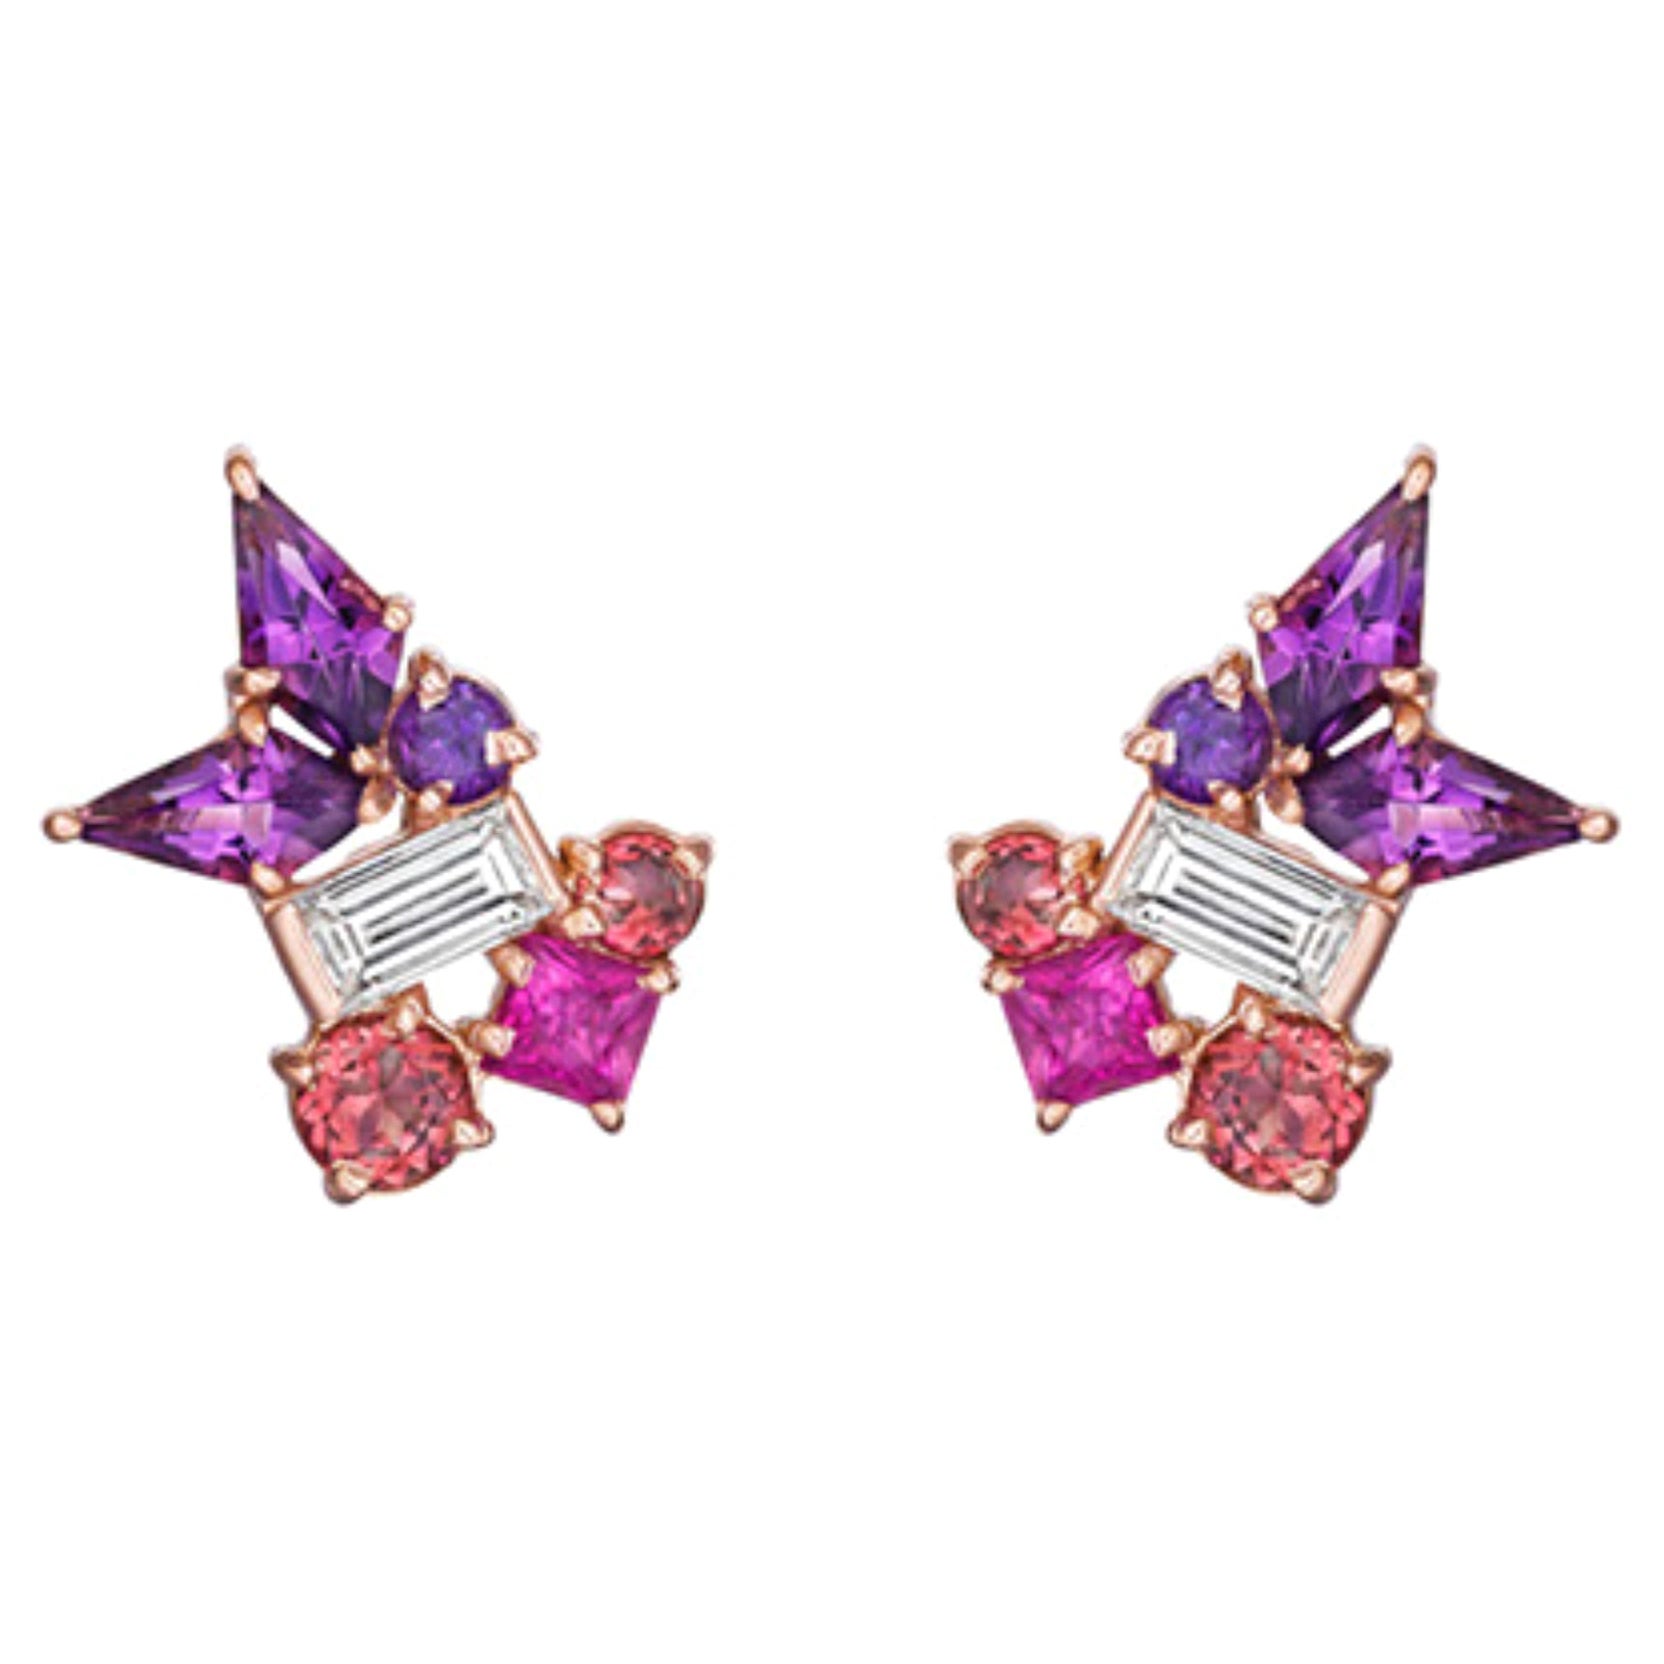 Melting Ice Amethyst and Pink Sapphire Earrings by MadStone For Sale